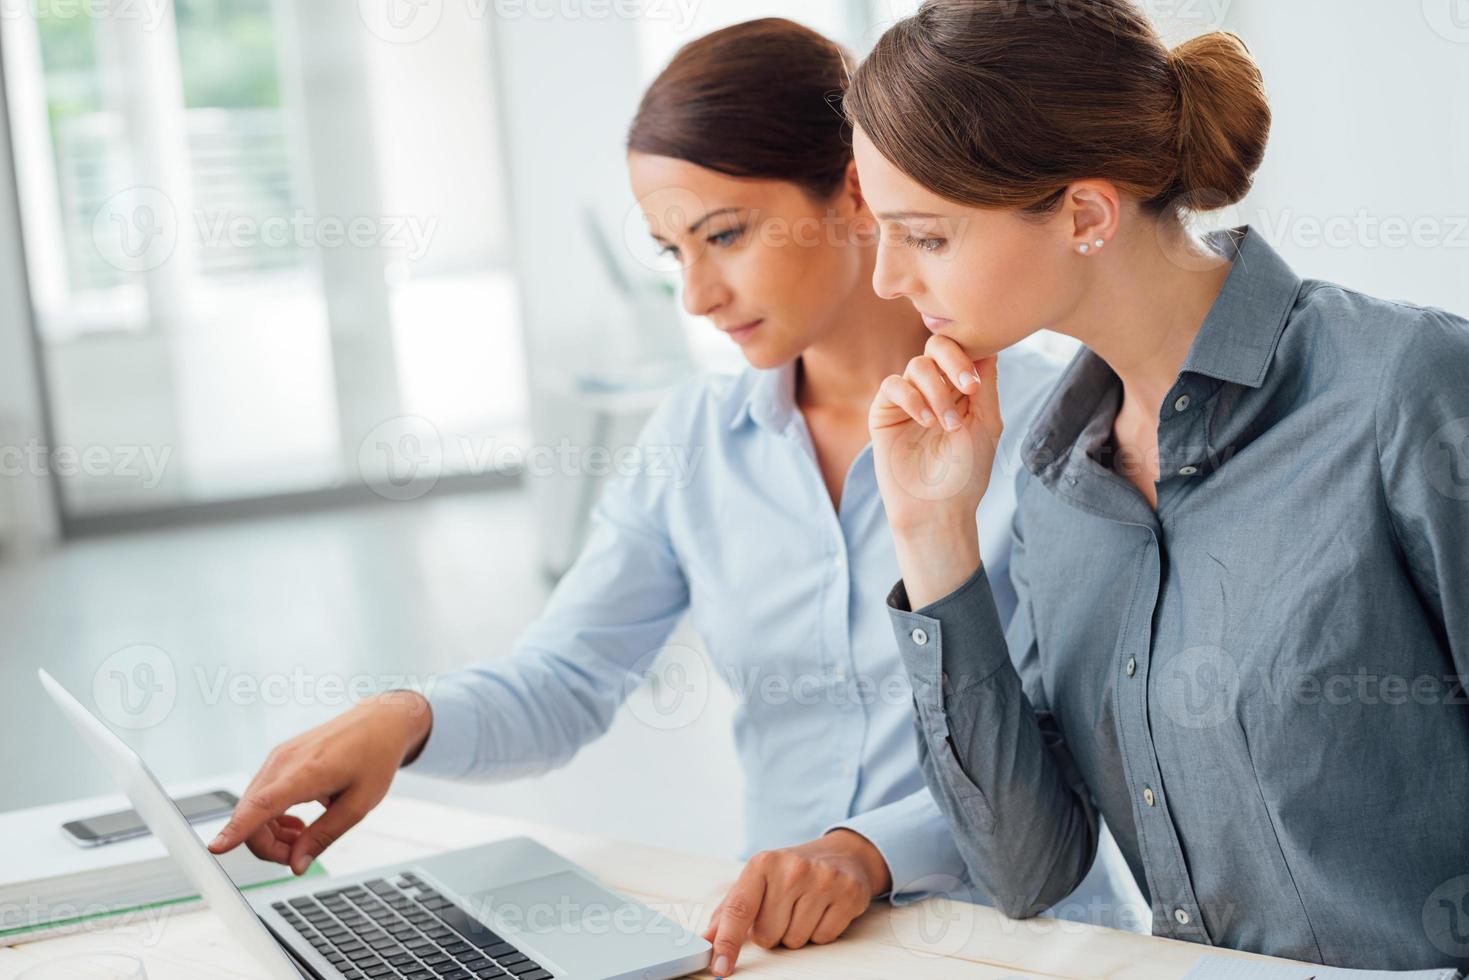 Business women working together on a laptop photo